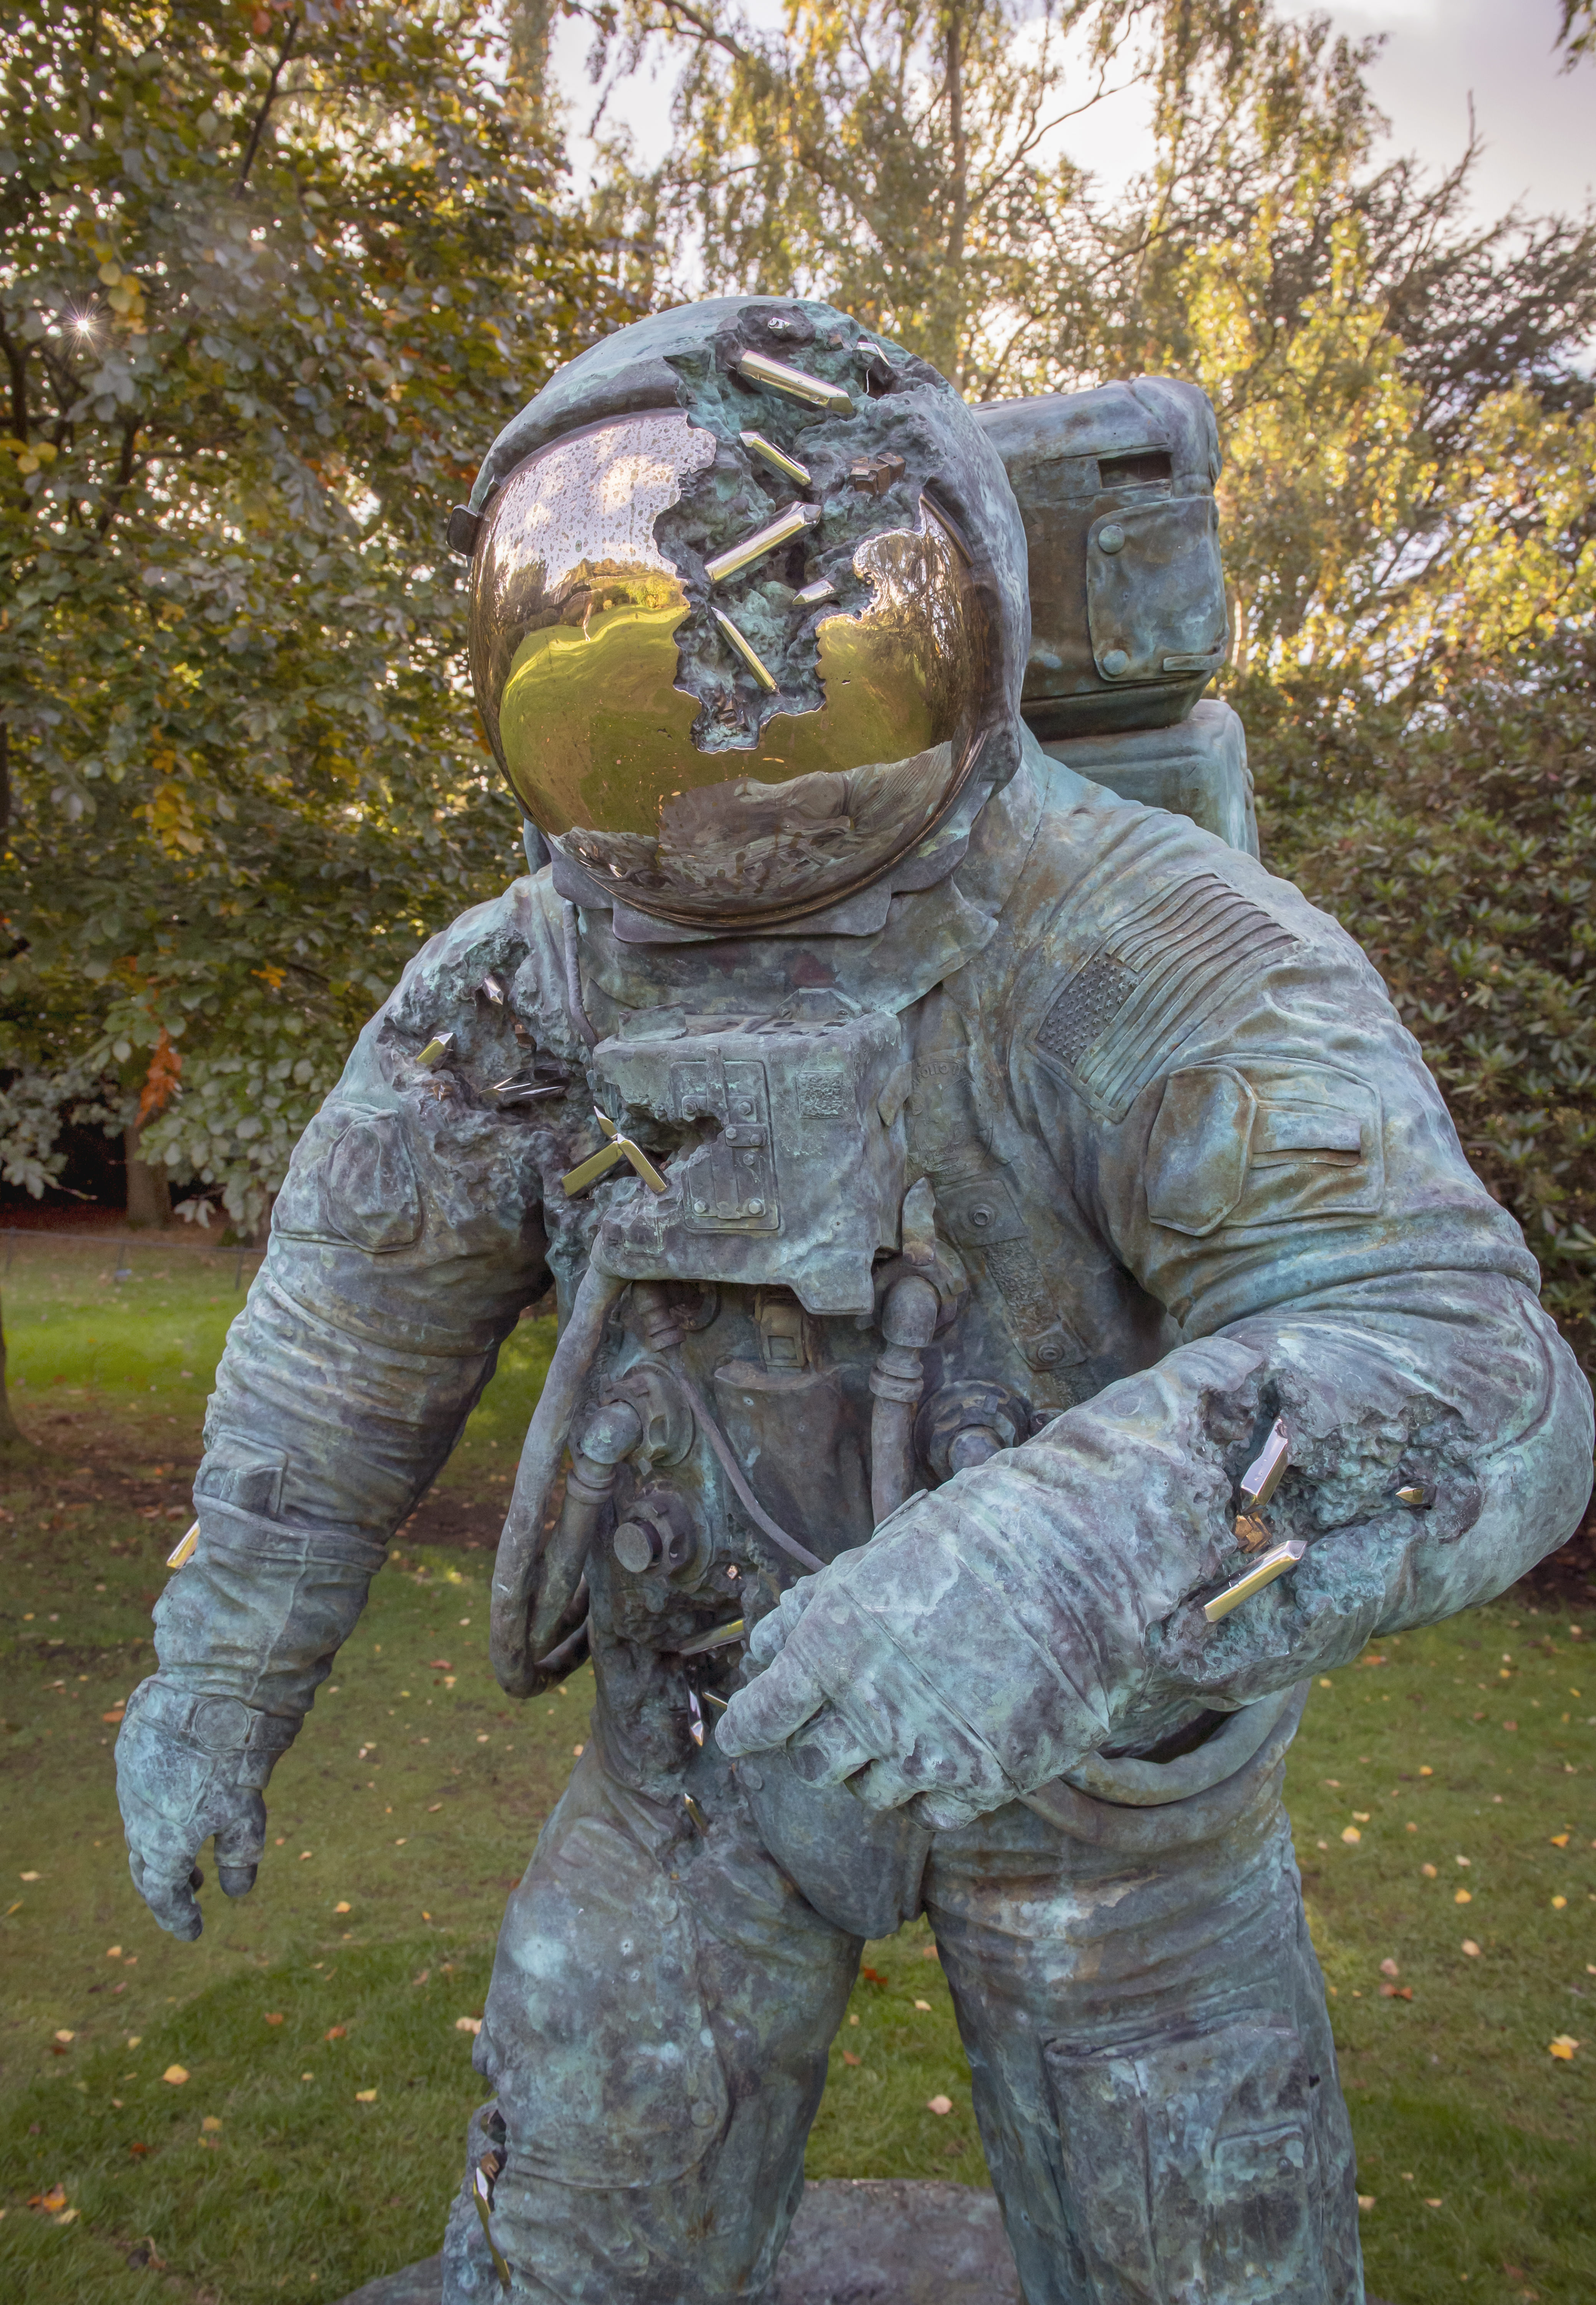 A bronze sculpture of an astronaut with crystal erosions coming out of the bronze.